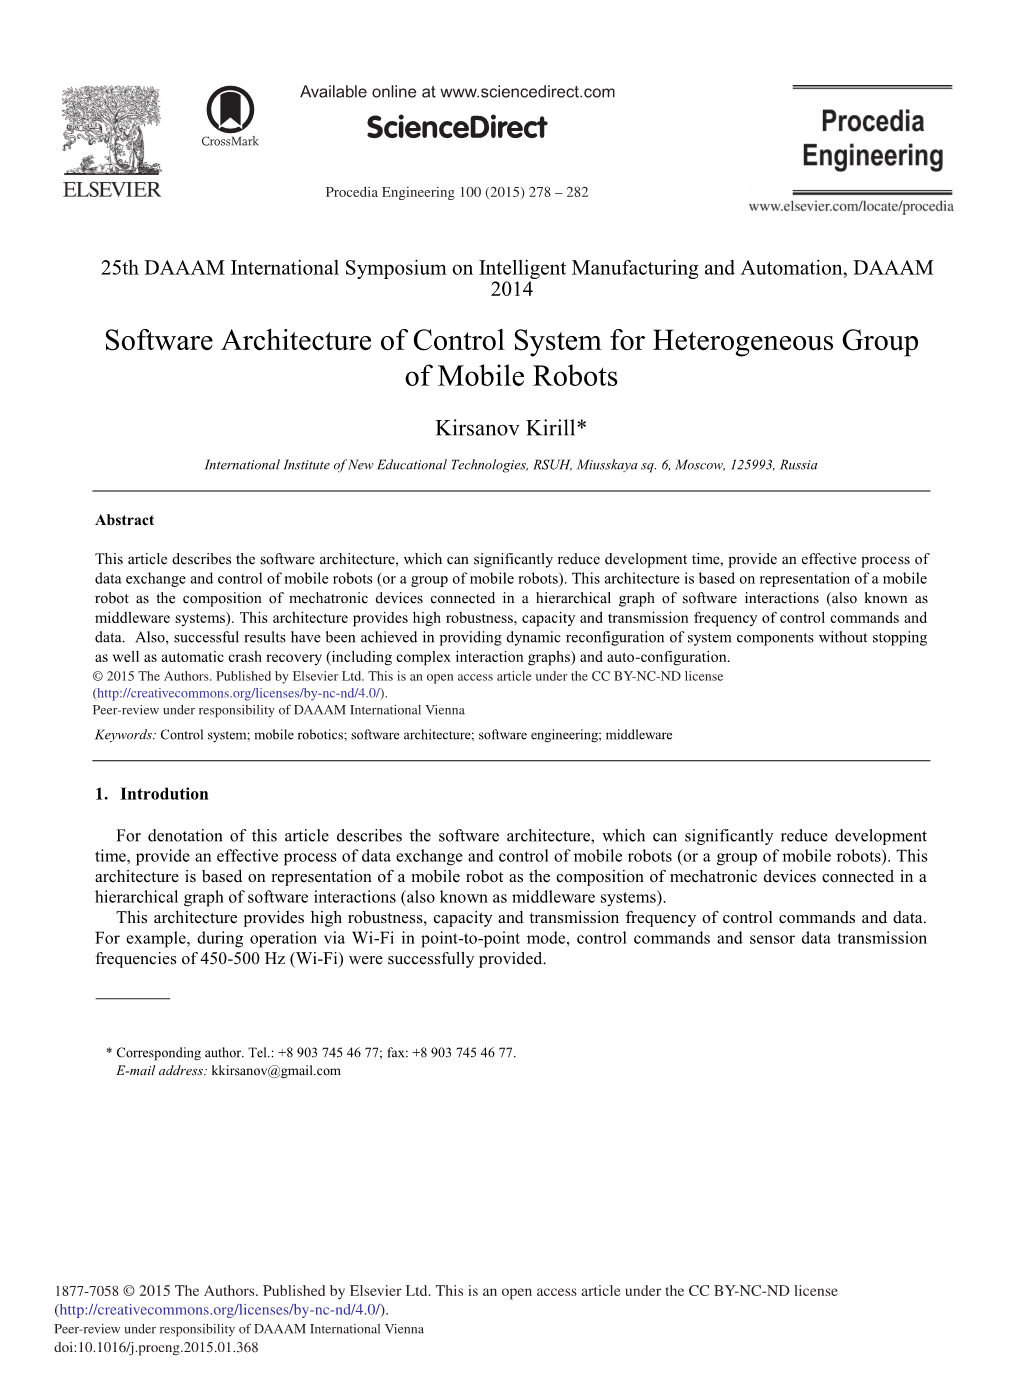 Software Architecture of Control System for Heterogeneous Group of Mobile Robots